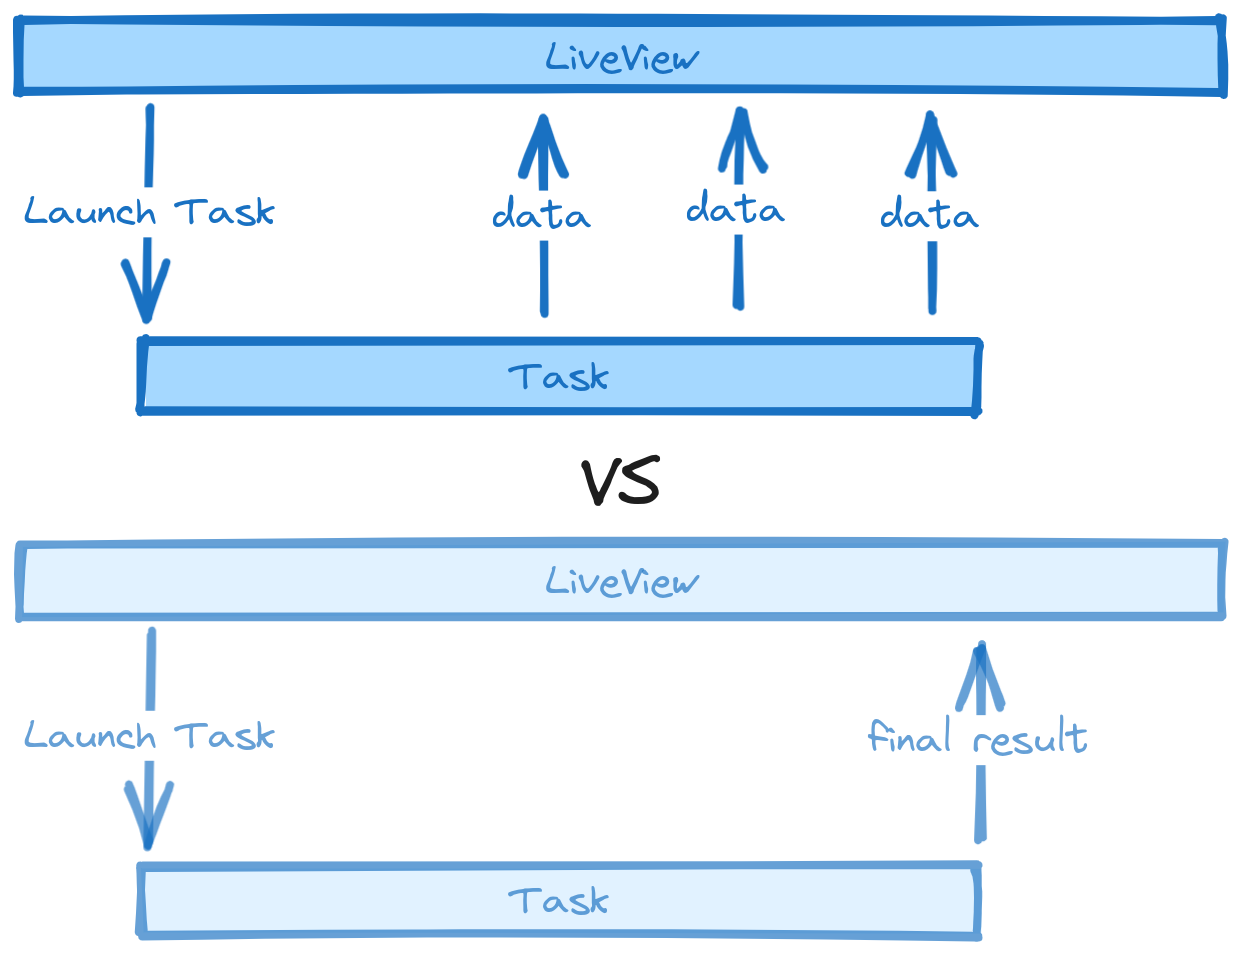 Process overview of creating a Task and receiving messages during process versus getting the result only at the end.